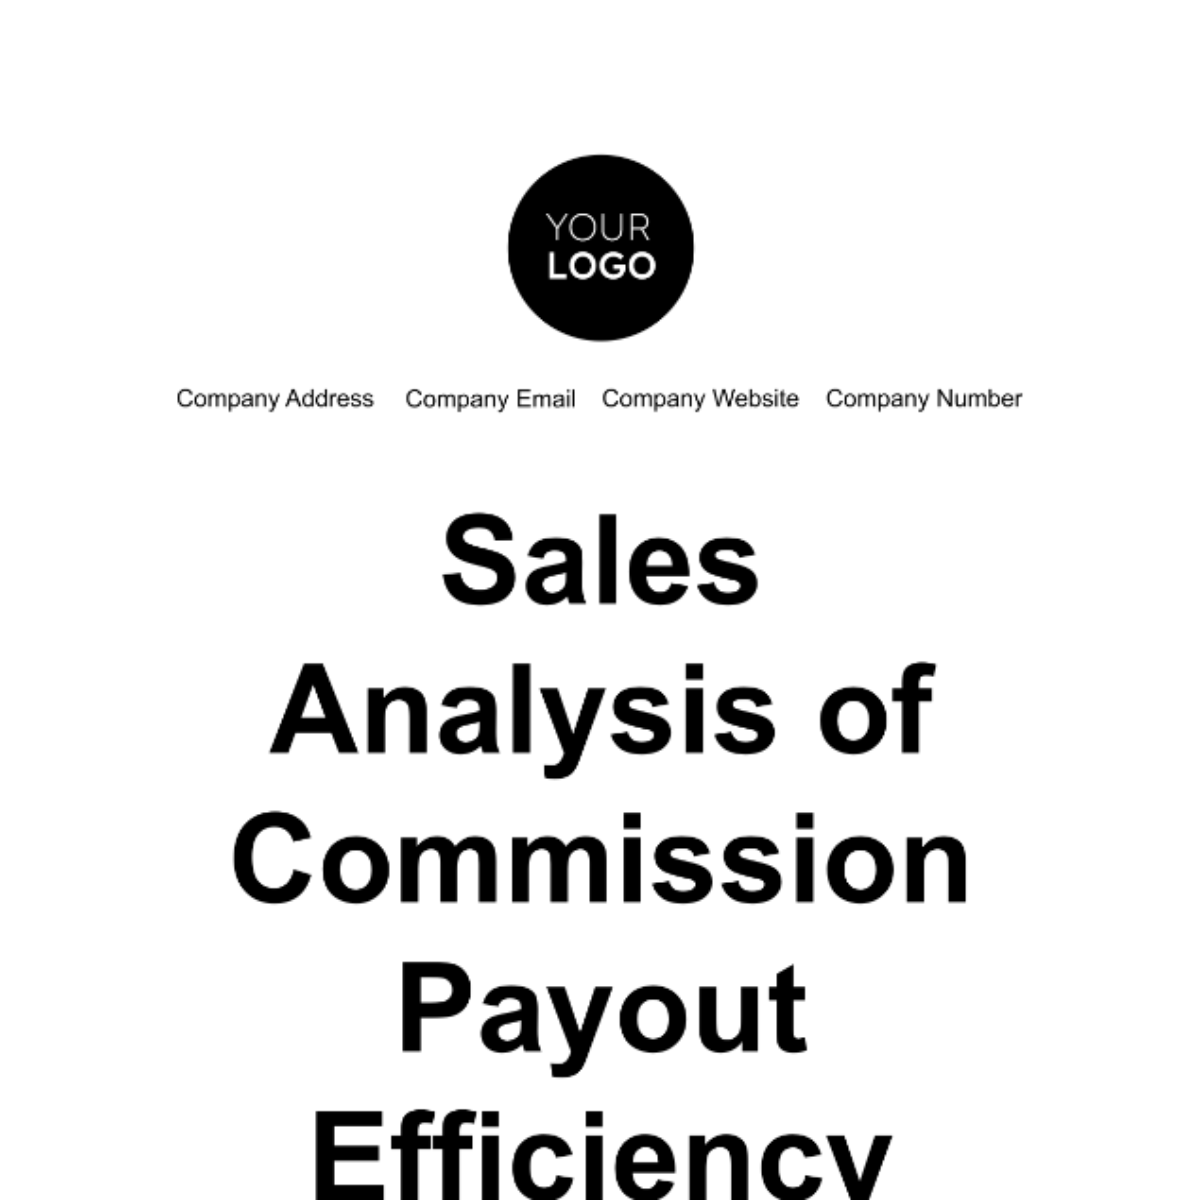 Sales Analysis of Commission Payout Efficiency Template